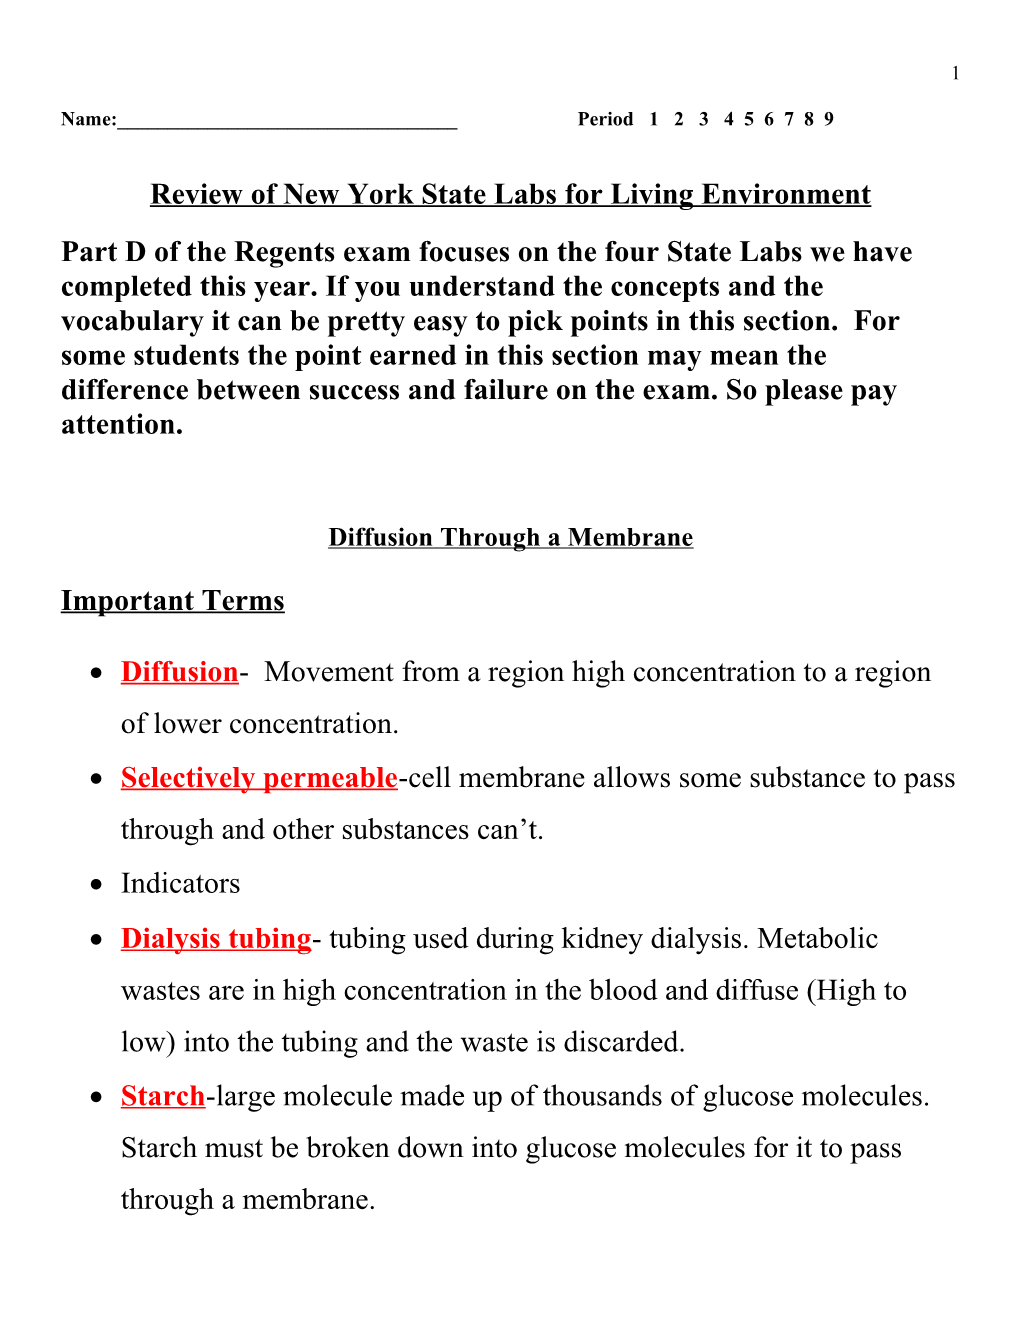 Review of New York State Labs for Living Environment